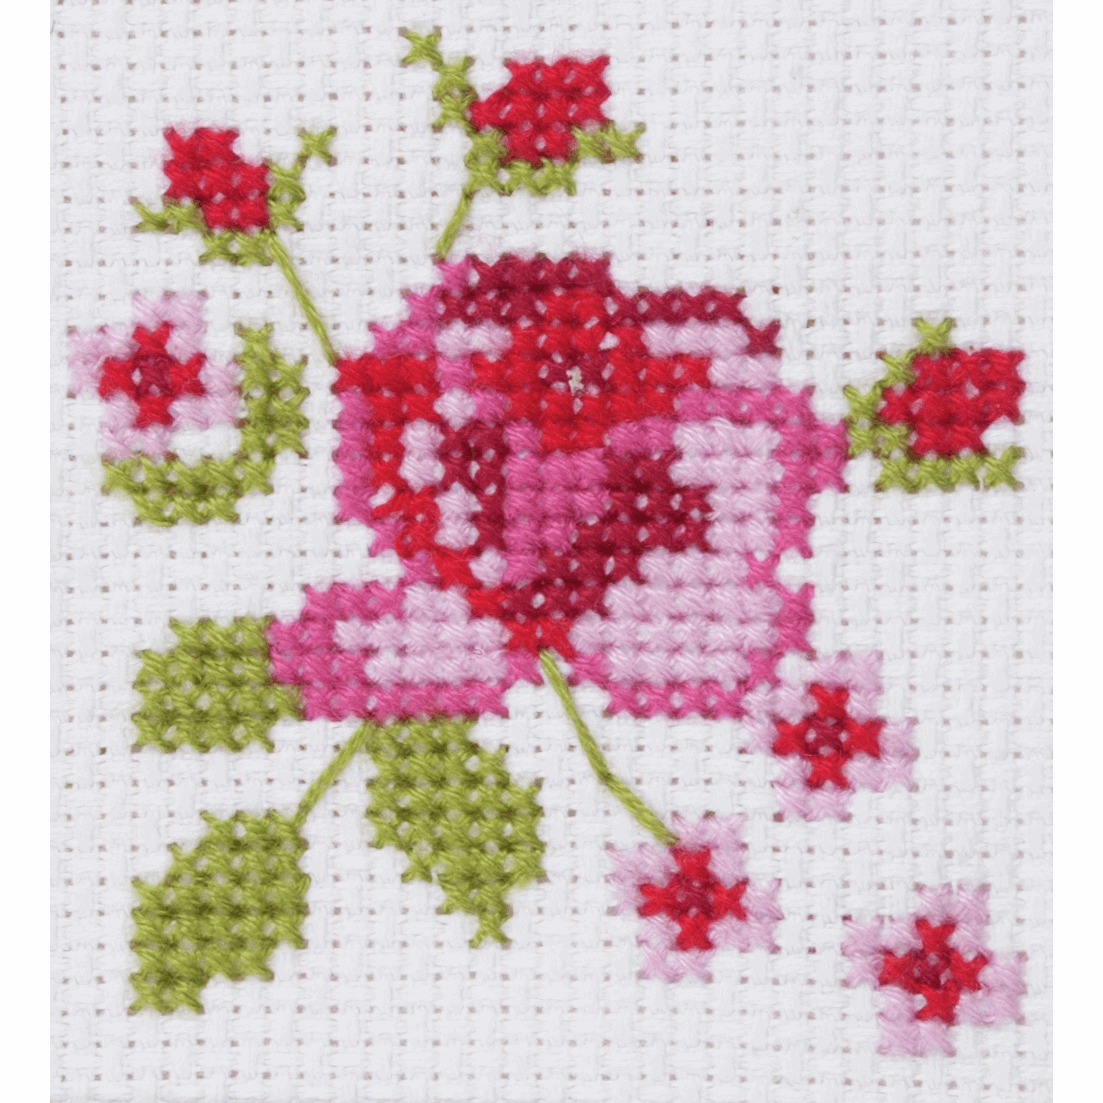 Counted Cross Stitch Card Kit - Floral